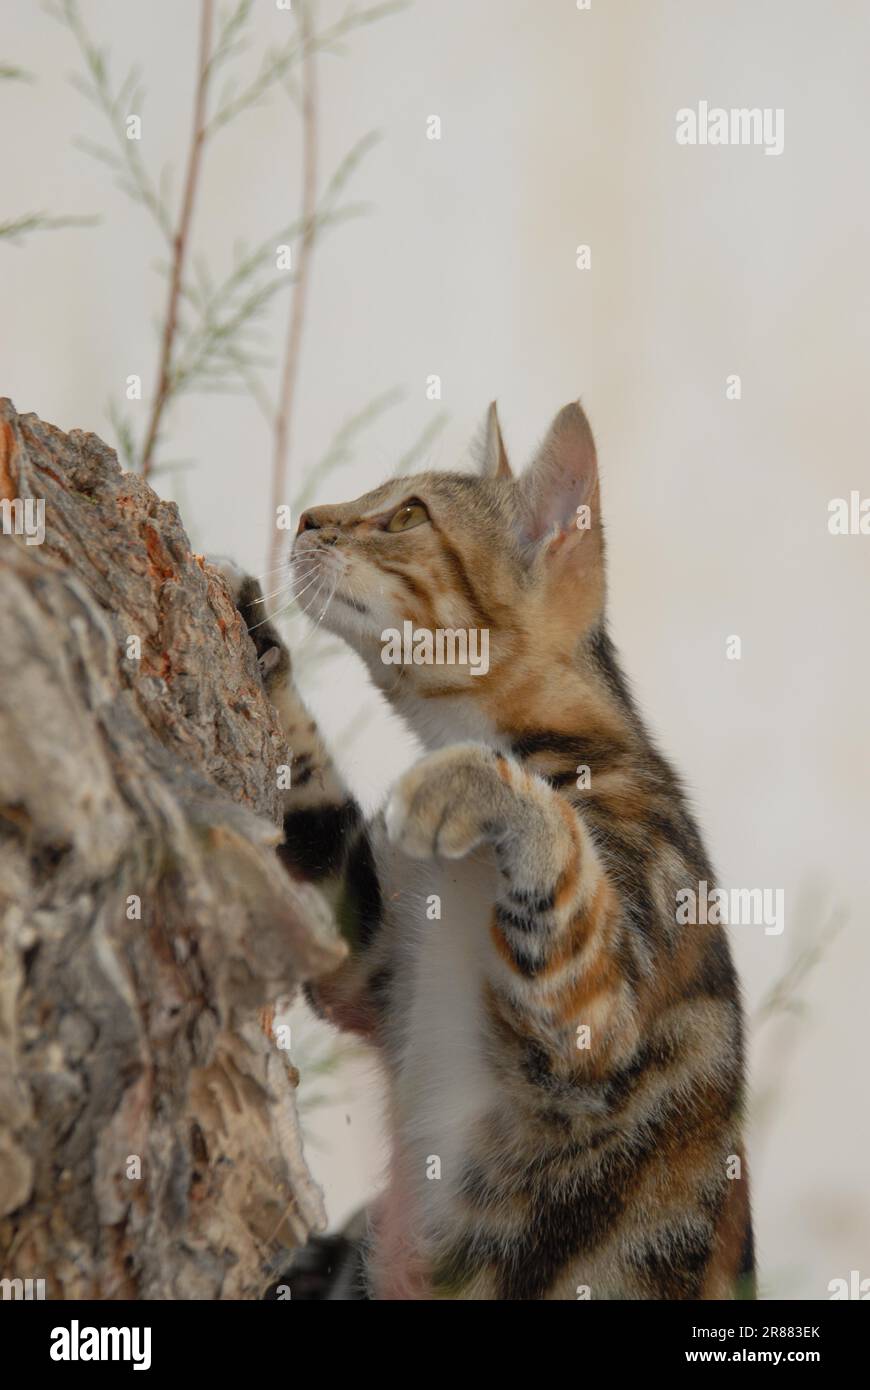 Young domestic kitten, Tortie Tabby with White, climbing up a tree, Dodecanese, Greece, kitten, Black Tortie Tabby (Torbie) and White, is climbing up Stock Photo